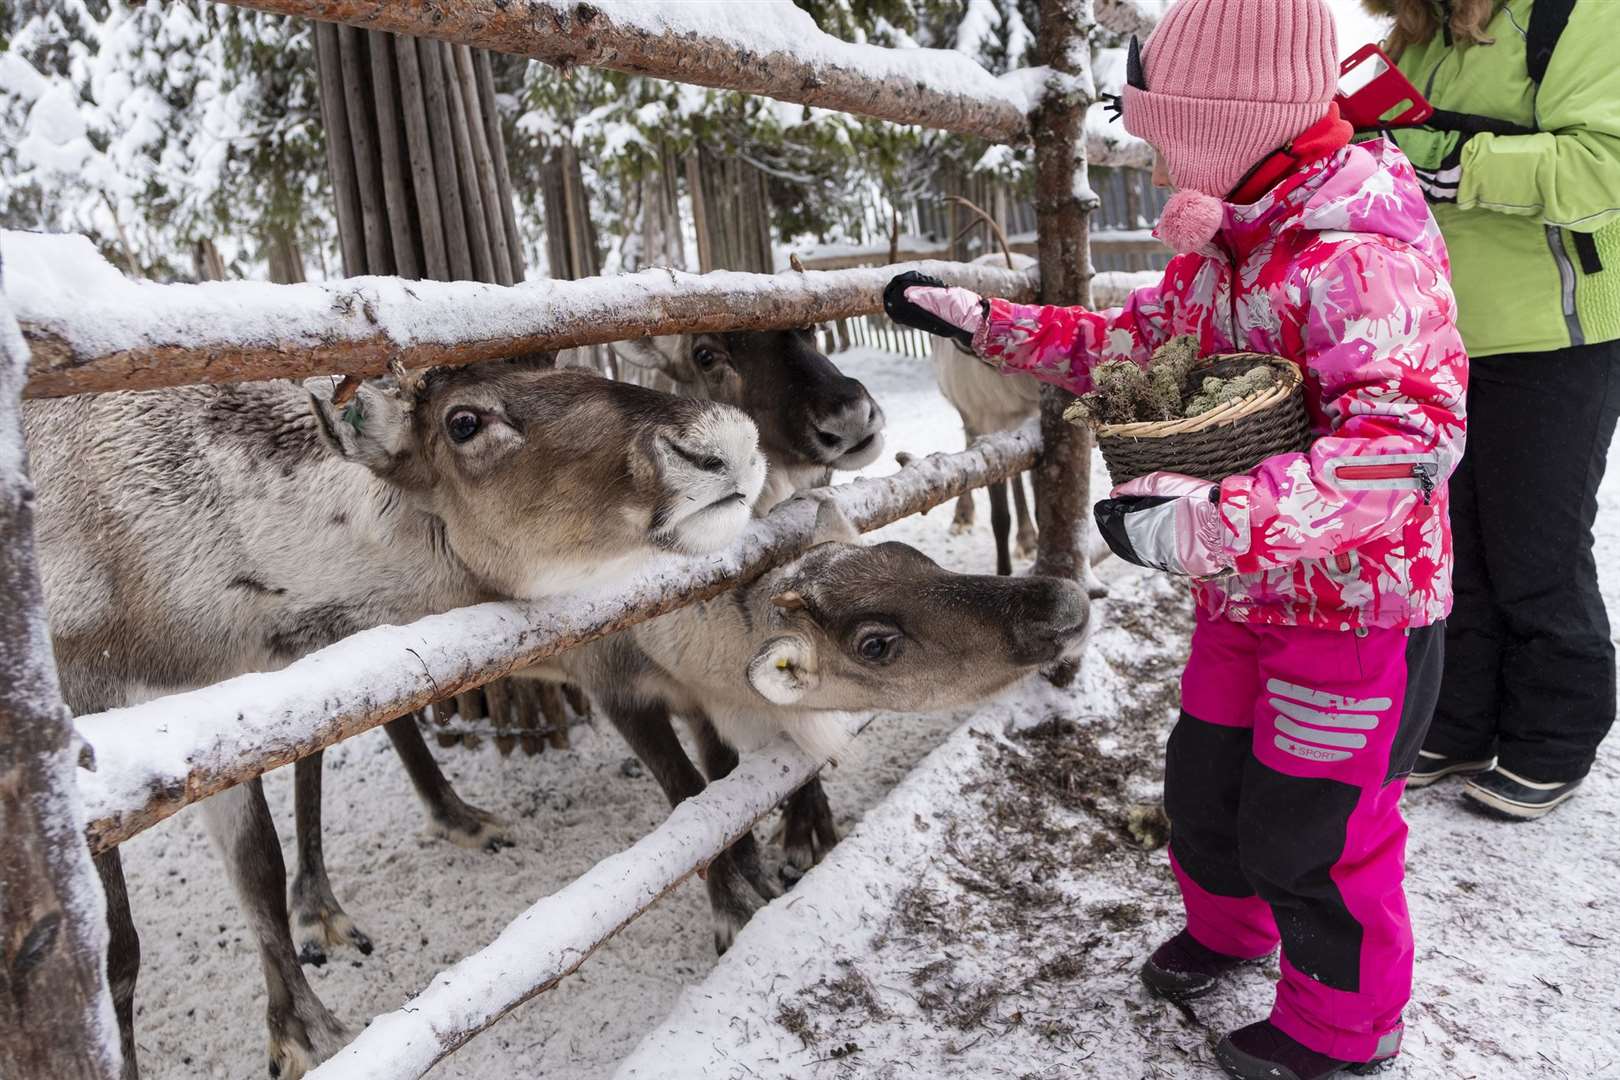 Take the family on a festive day out to meet Santa's reindeer. Picture: iStock